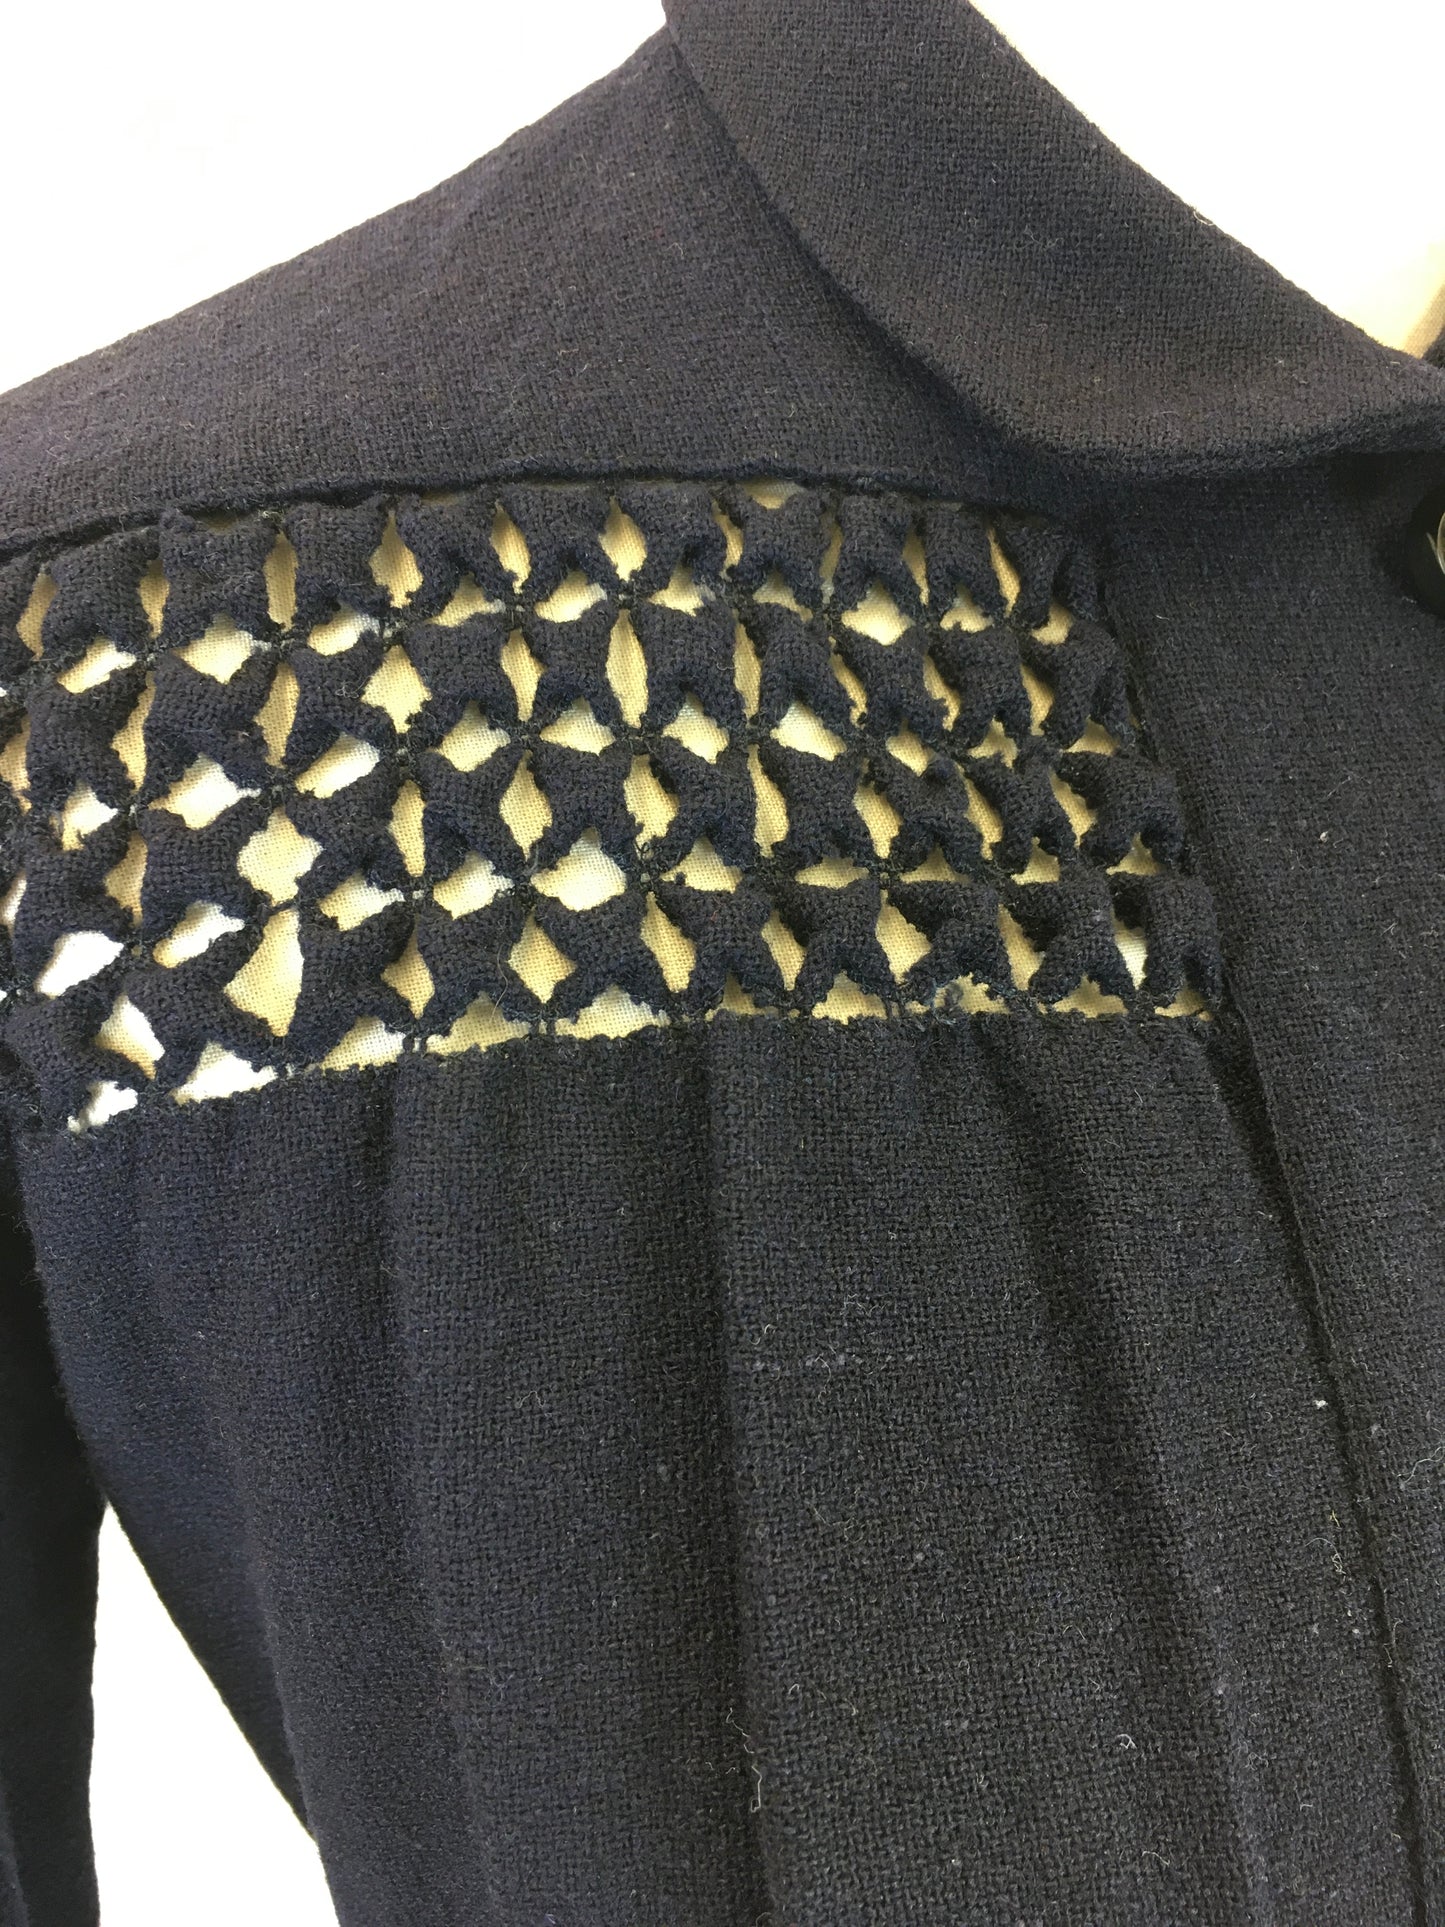 Original 1940’s Fabulous Navy Wool Dress - With Peter Pan Collar, Lattice Work and Pleated Detailing